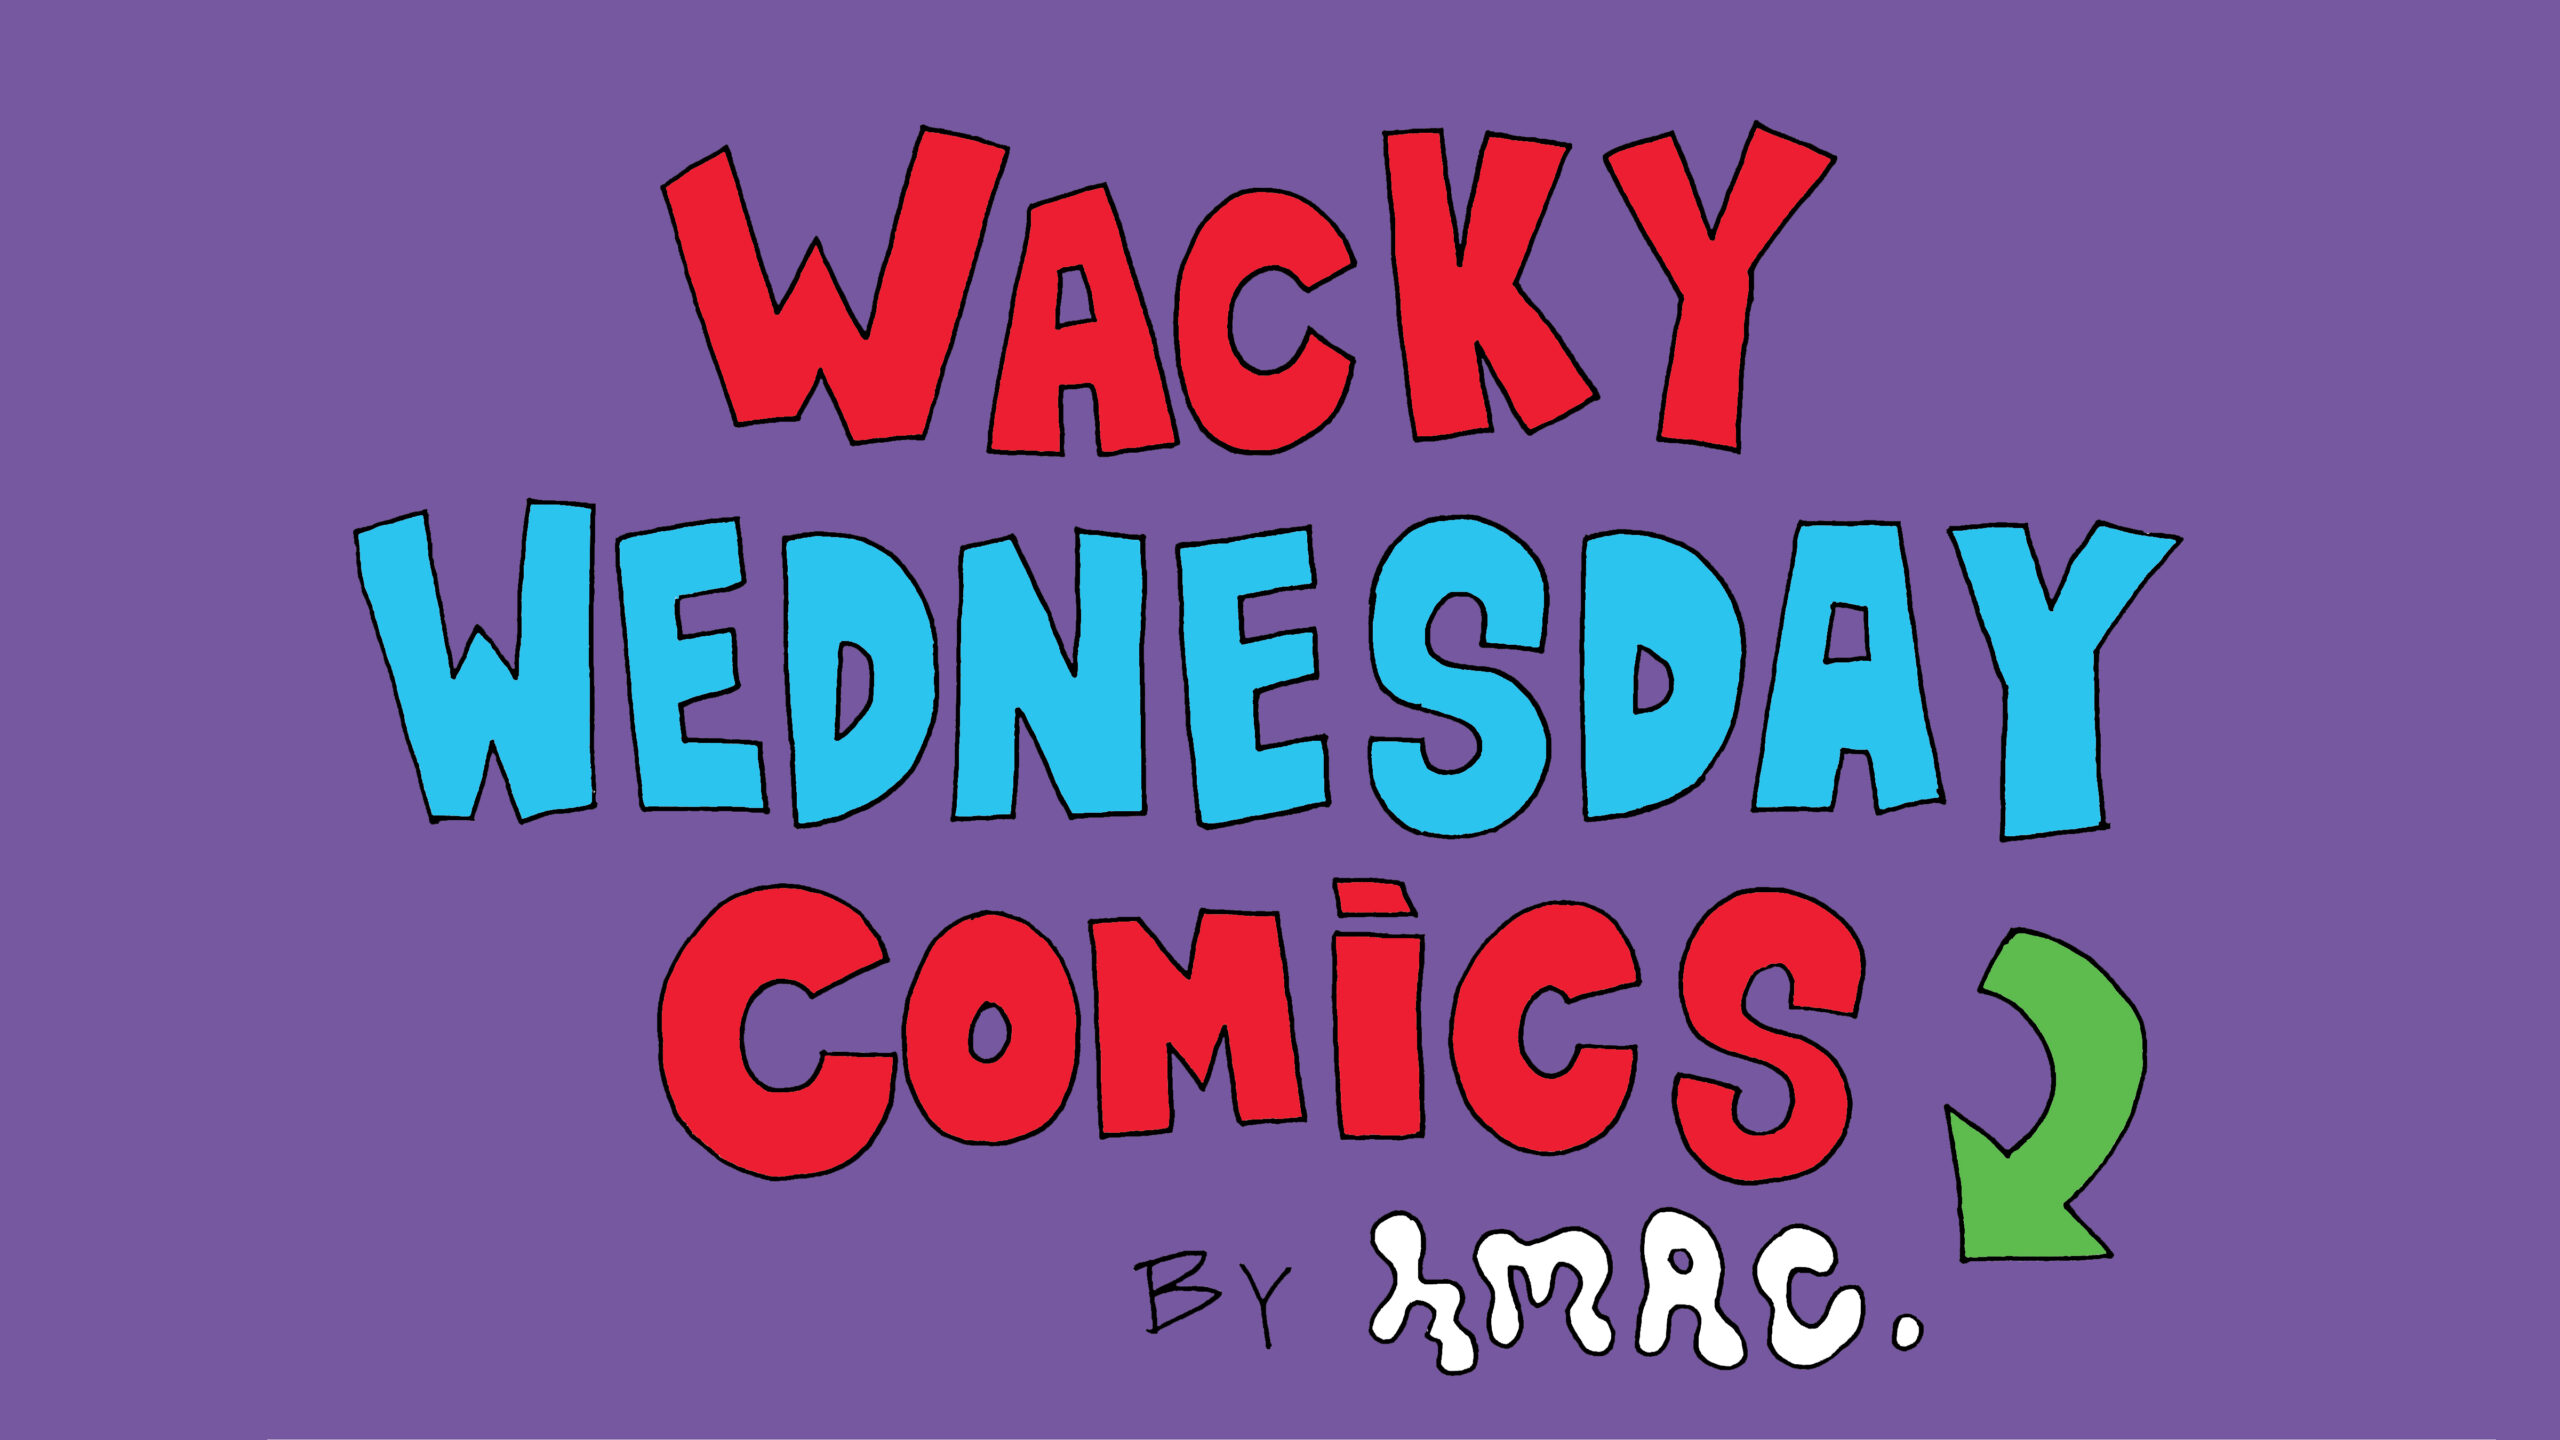 Illustrations with red and blue letters saying "Wacky Wednesday Comics by HMAC."